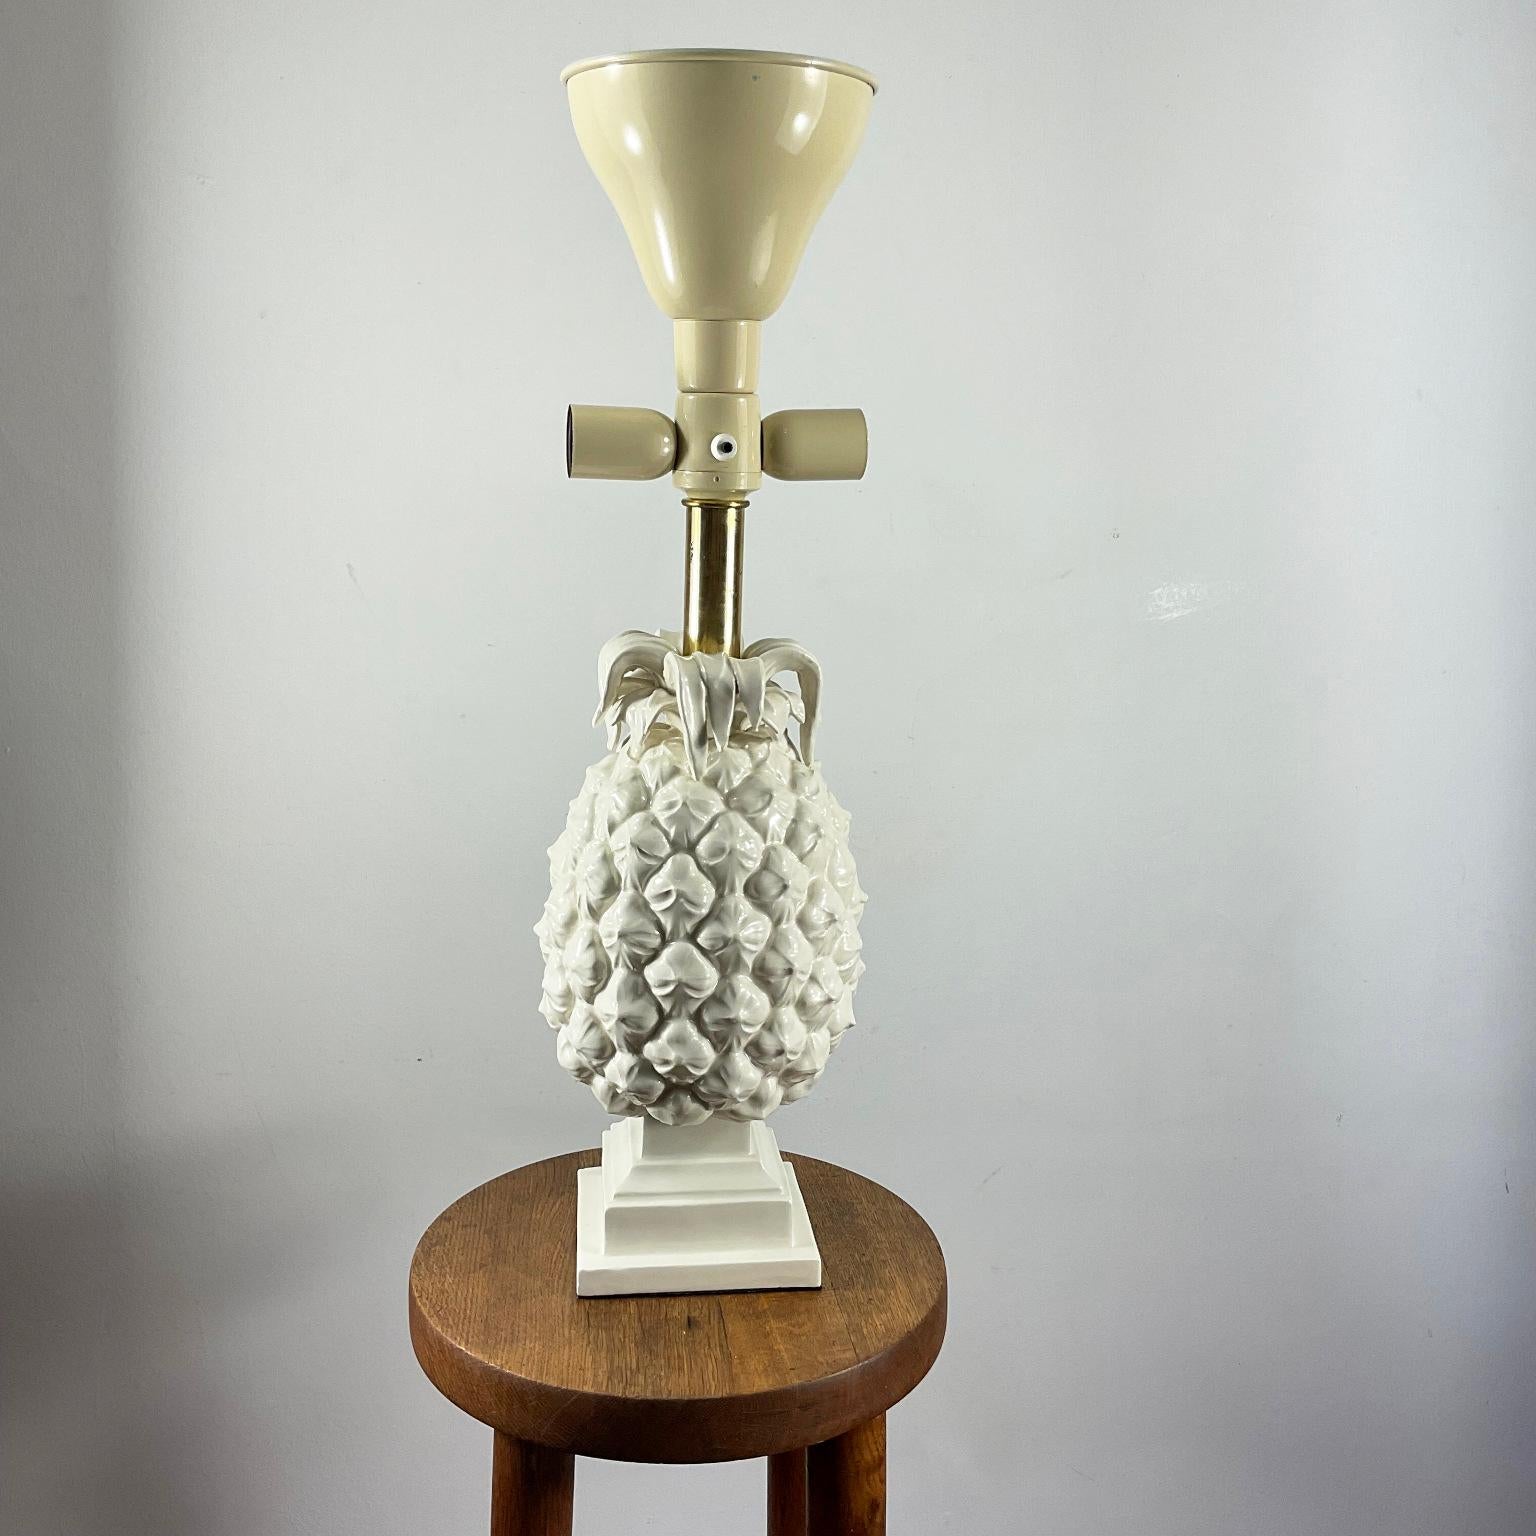 Hand-Crafted Pineapple Table Lamp in White Glazed Ceramic from Italy 1970s For Sale